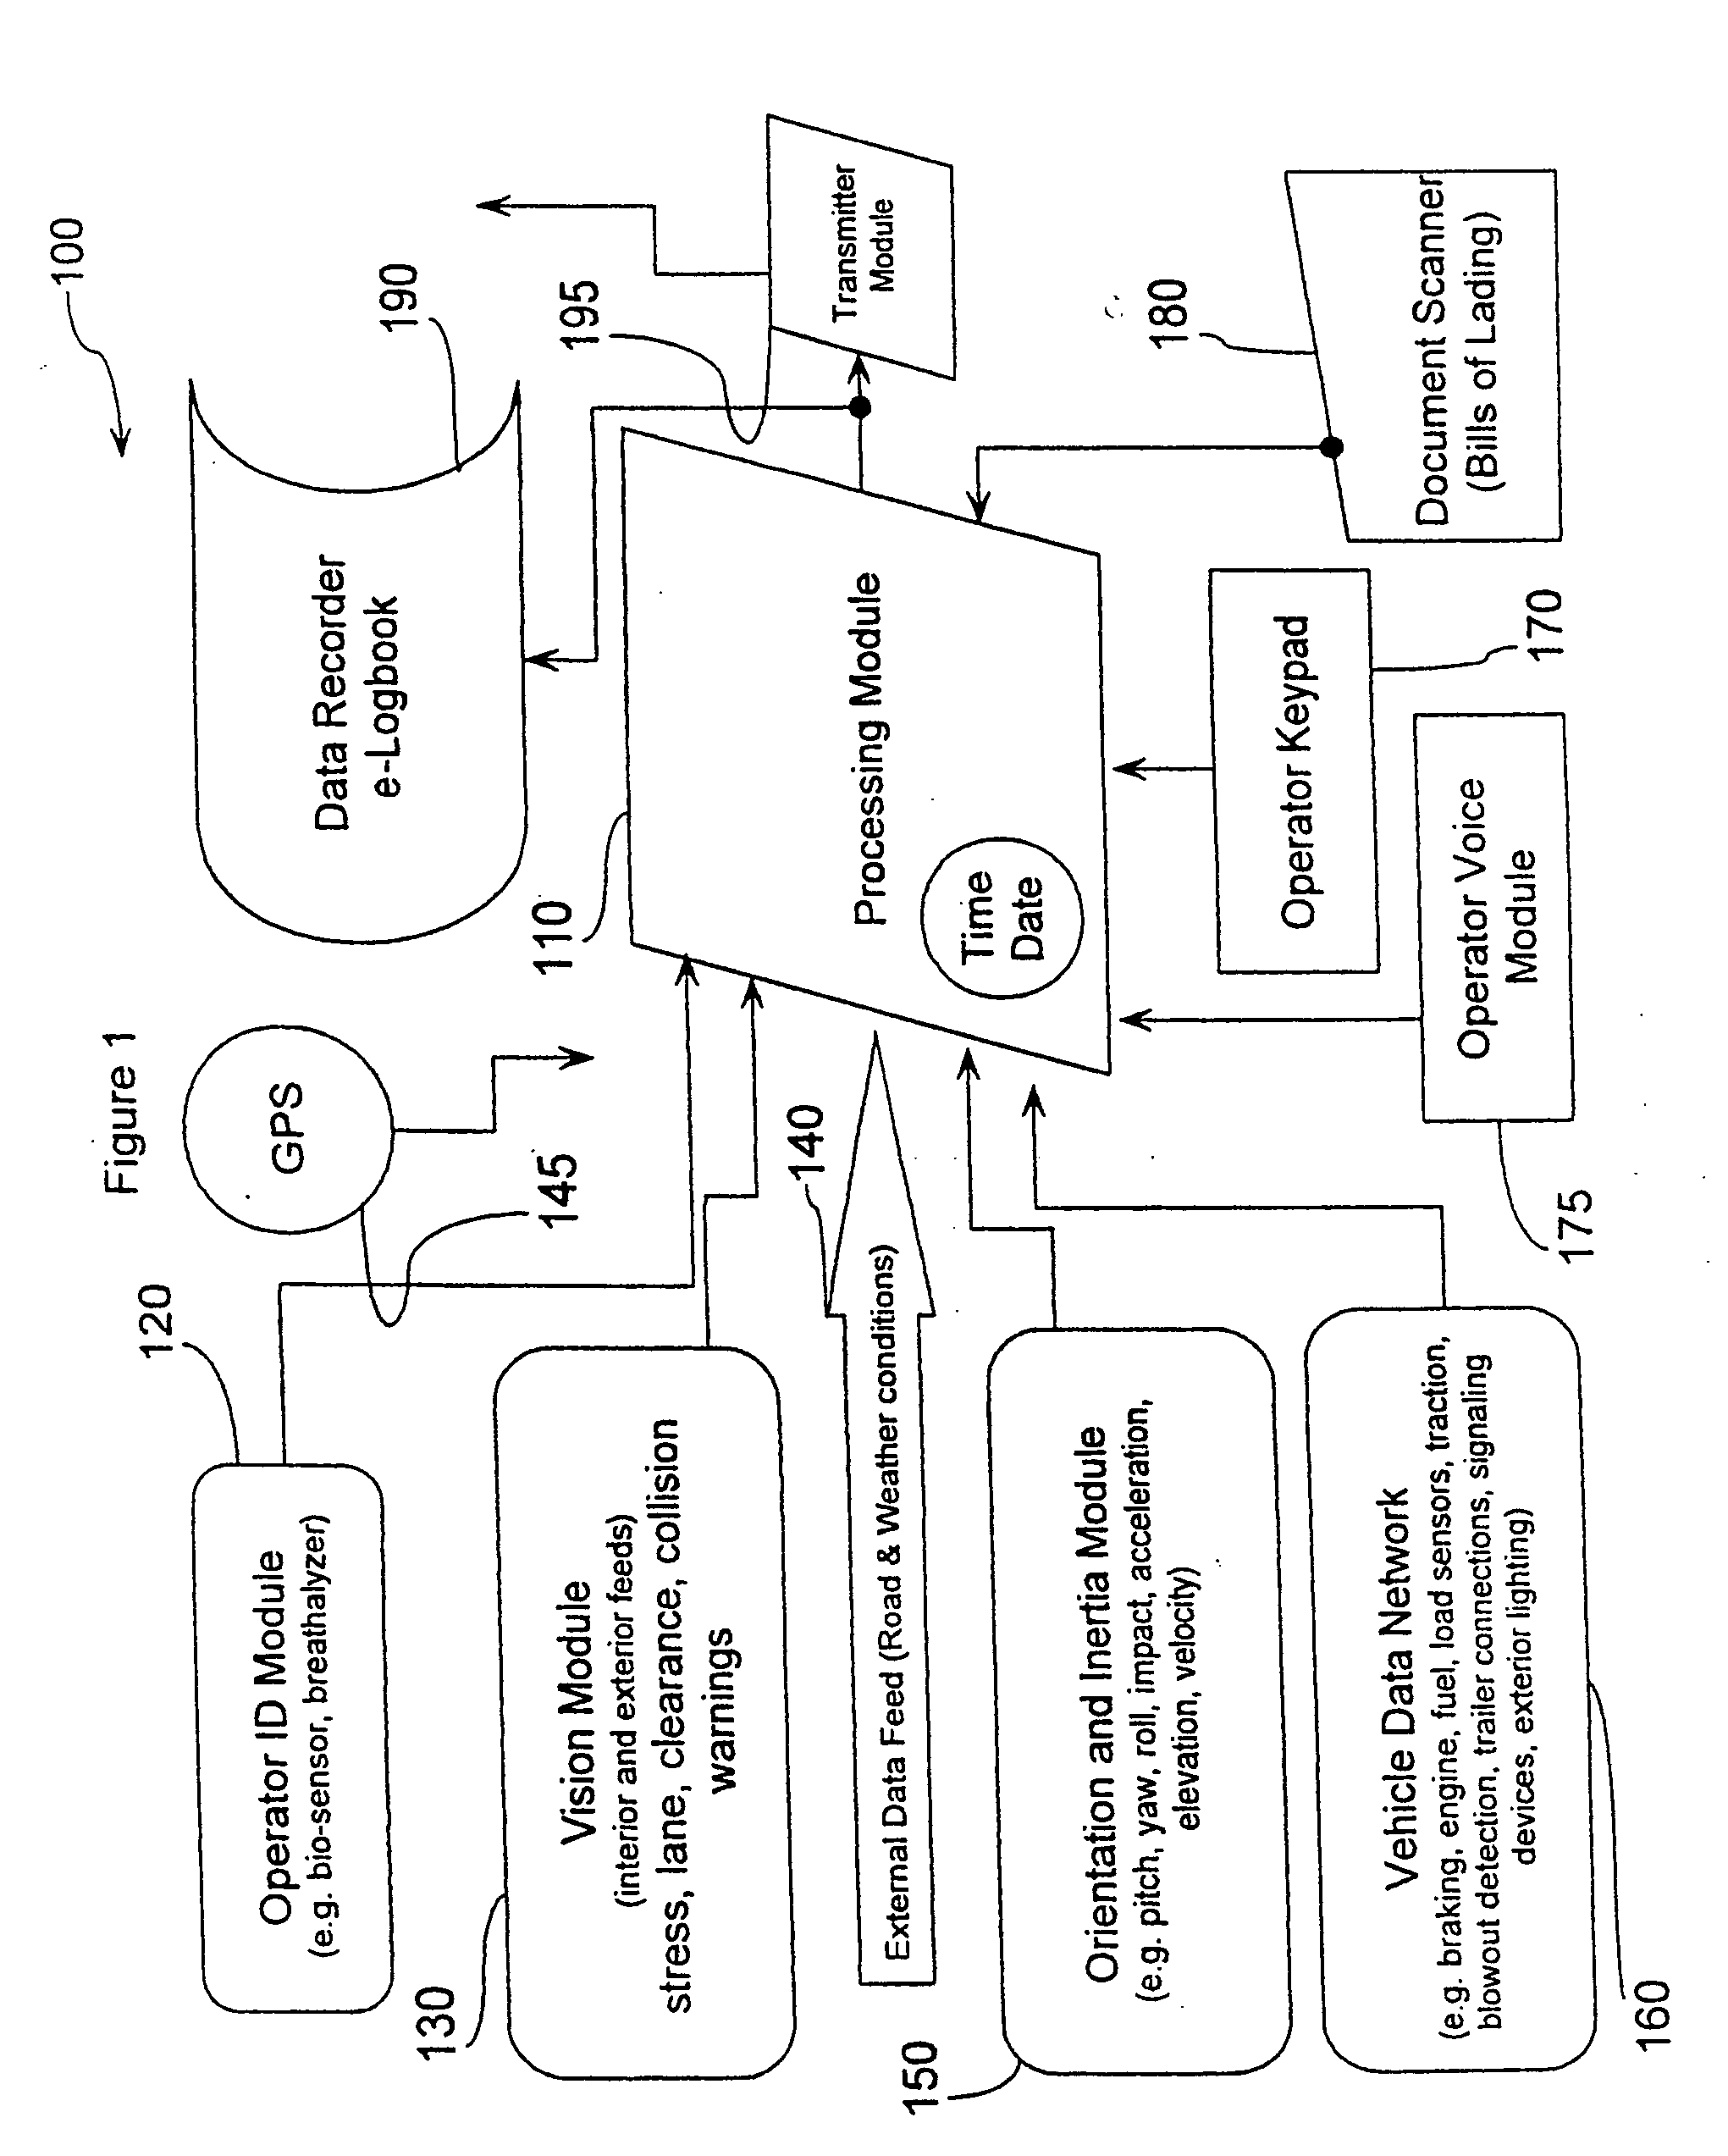 Method, system, and apparatus for monitoring vehicle operation